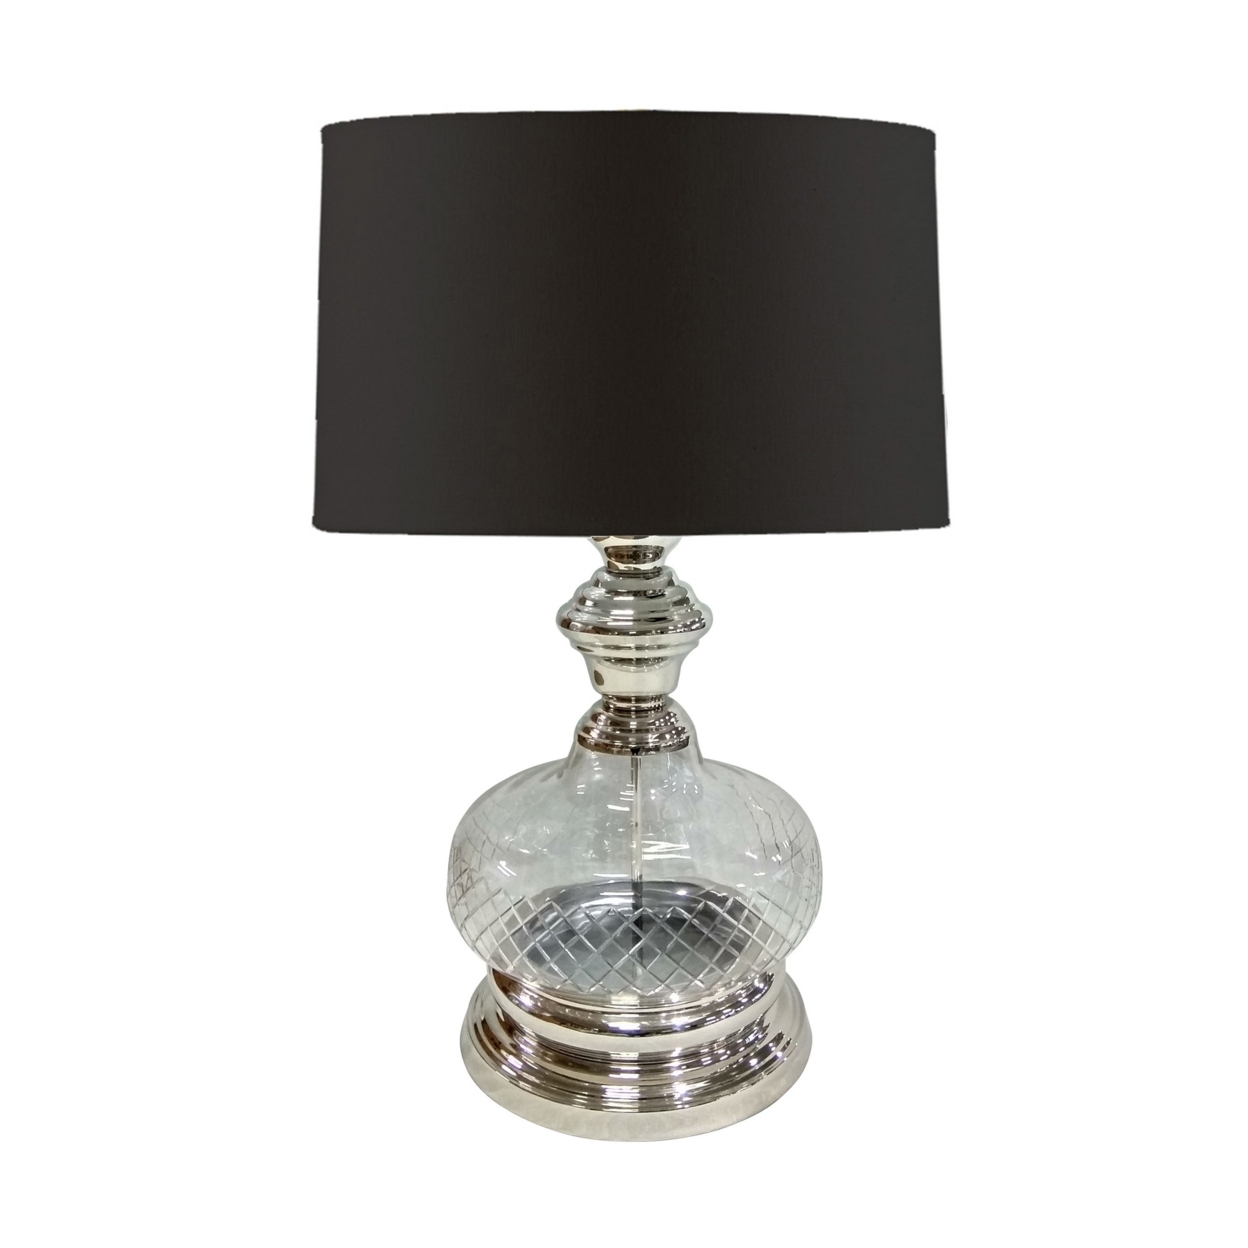 Pot Bellied Shape Glass Table Lamp with Metal Tier Base, Clear and Black- Saltoro Sherpi